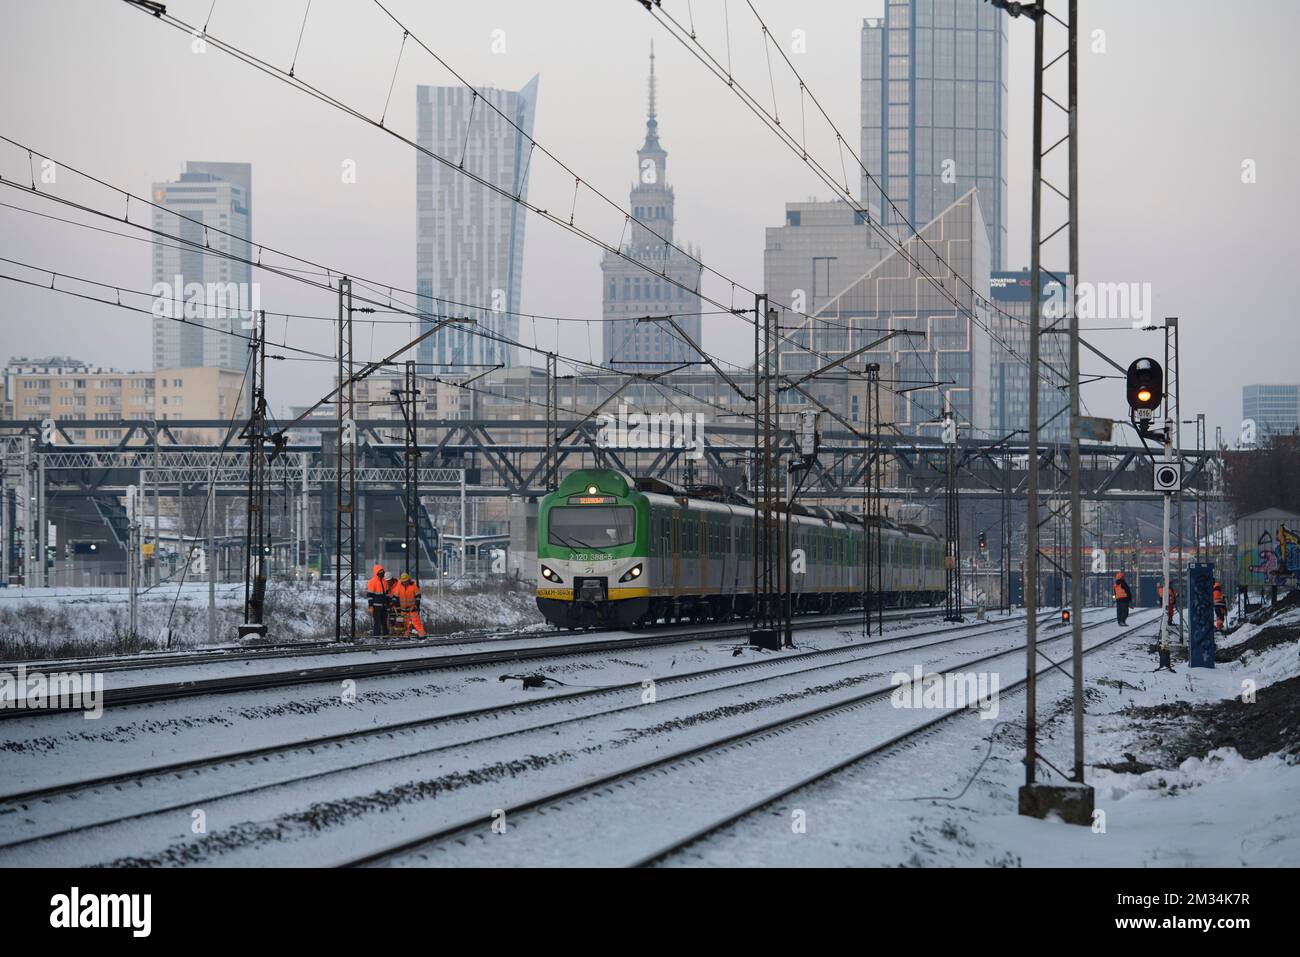 Warsaw, Warsaw, Poland. 14th Dec, 2022. A train pass by workers as they work on December 14, 2022 in Warsaw, Poland. Polish State Railways (PKP) signed an agreement with the Center for European Union Transport Projects (CEUTP) and will receive a 1.3 billion of Polish Zlotys of co-financing for the modernisation of the central part of the main train line artery that cuts through Warsaw. The modernisation is part of the EU project TEN-T (Credit Image: © Aleksander Kalka/ZUMA Press Wire) Stock Photo